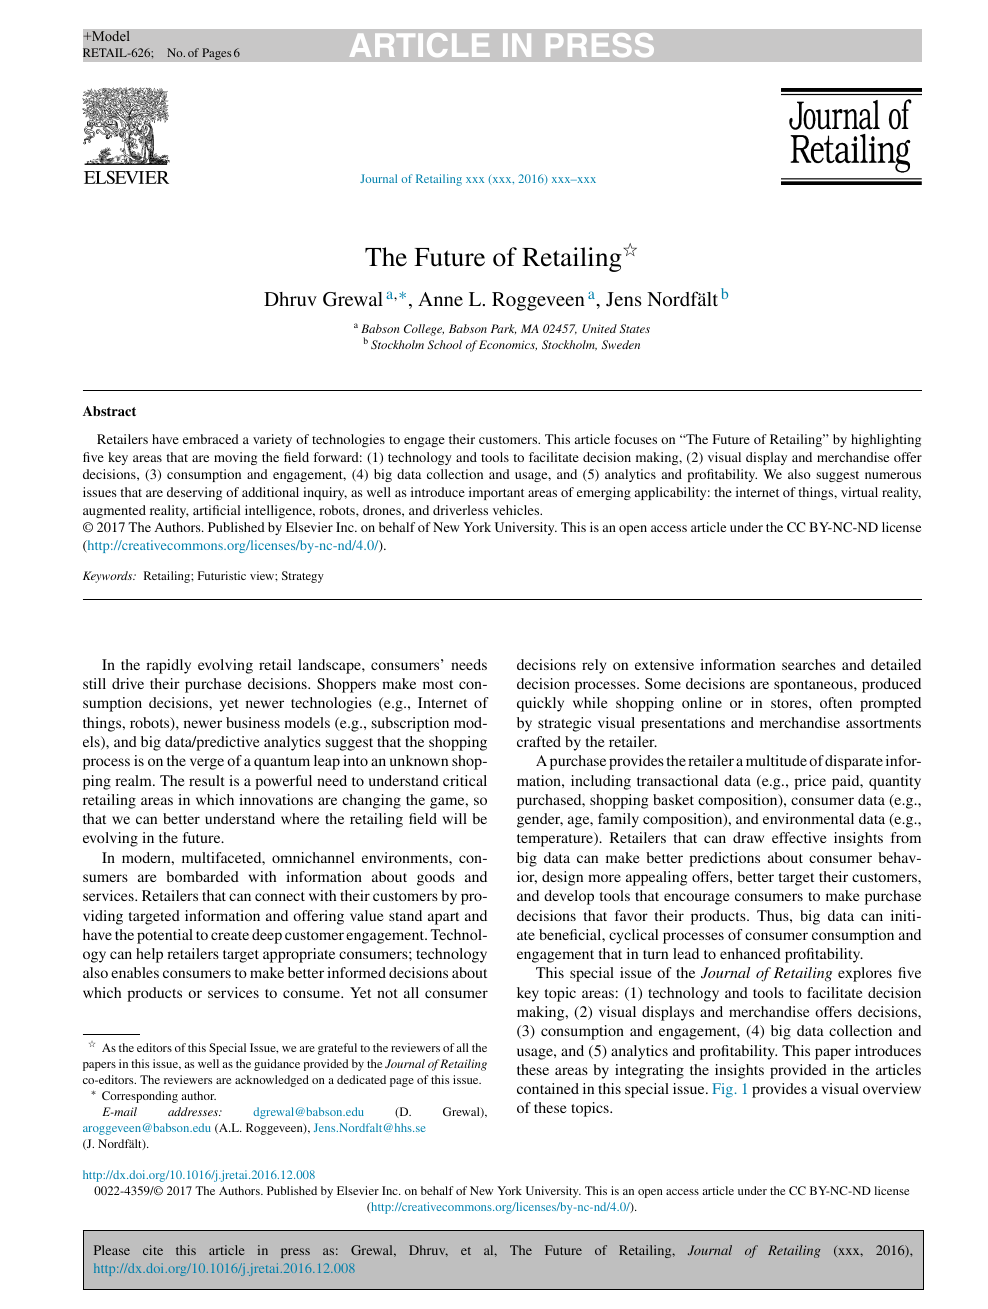 The Future Of Retailing Topic Of Research Paper In Computer And Information Sciences Download Scholarly Article Pdf And Read For Free On Cyberleninka Open Science Hub